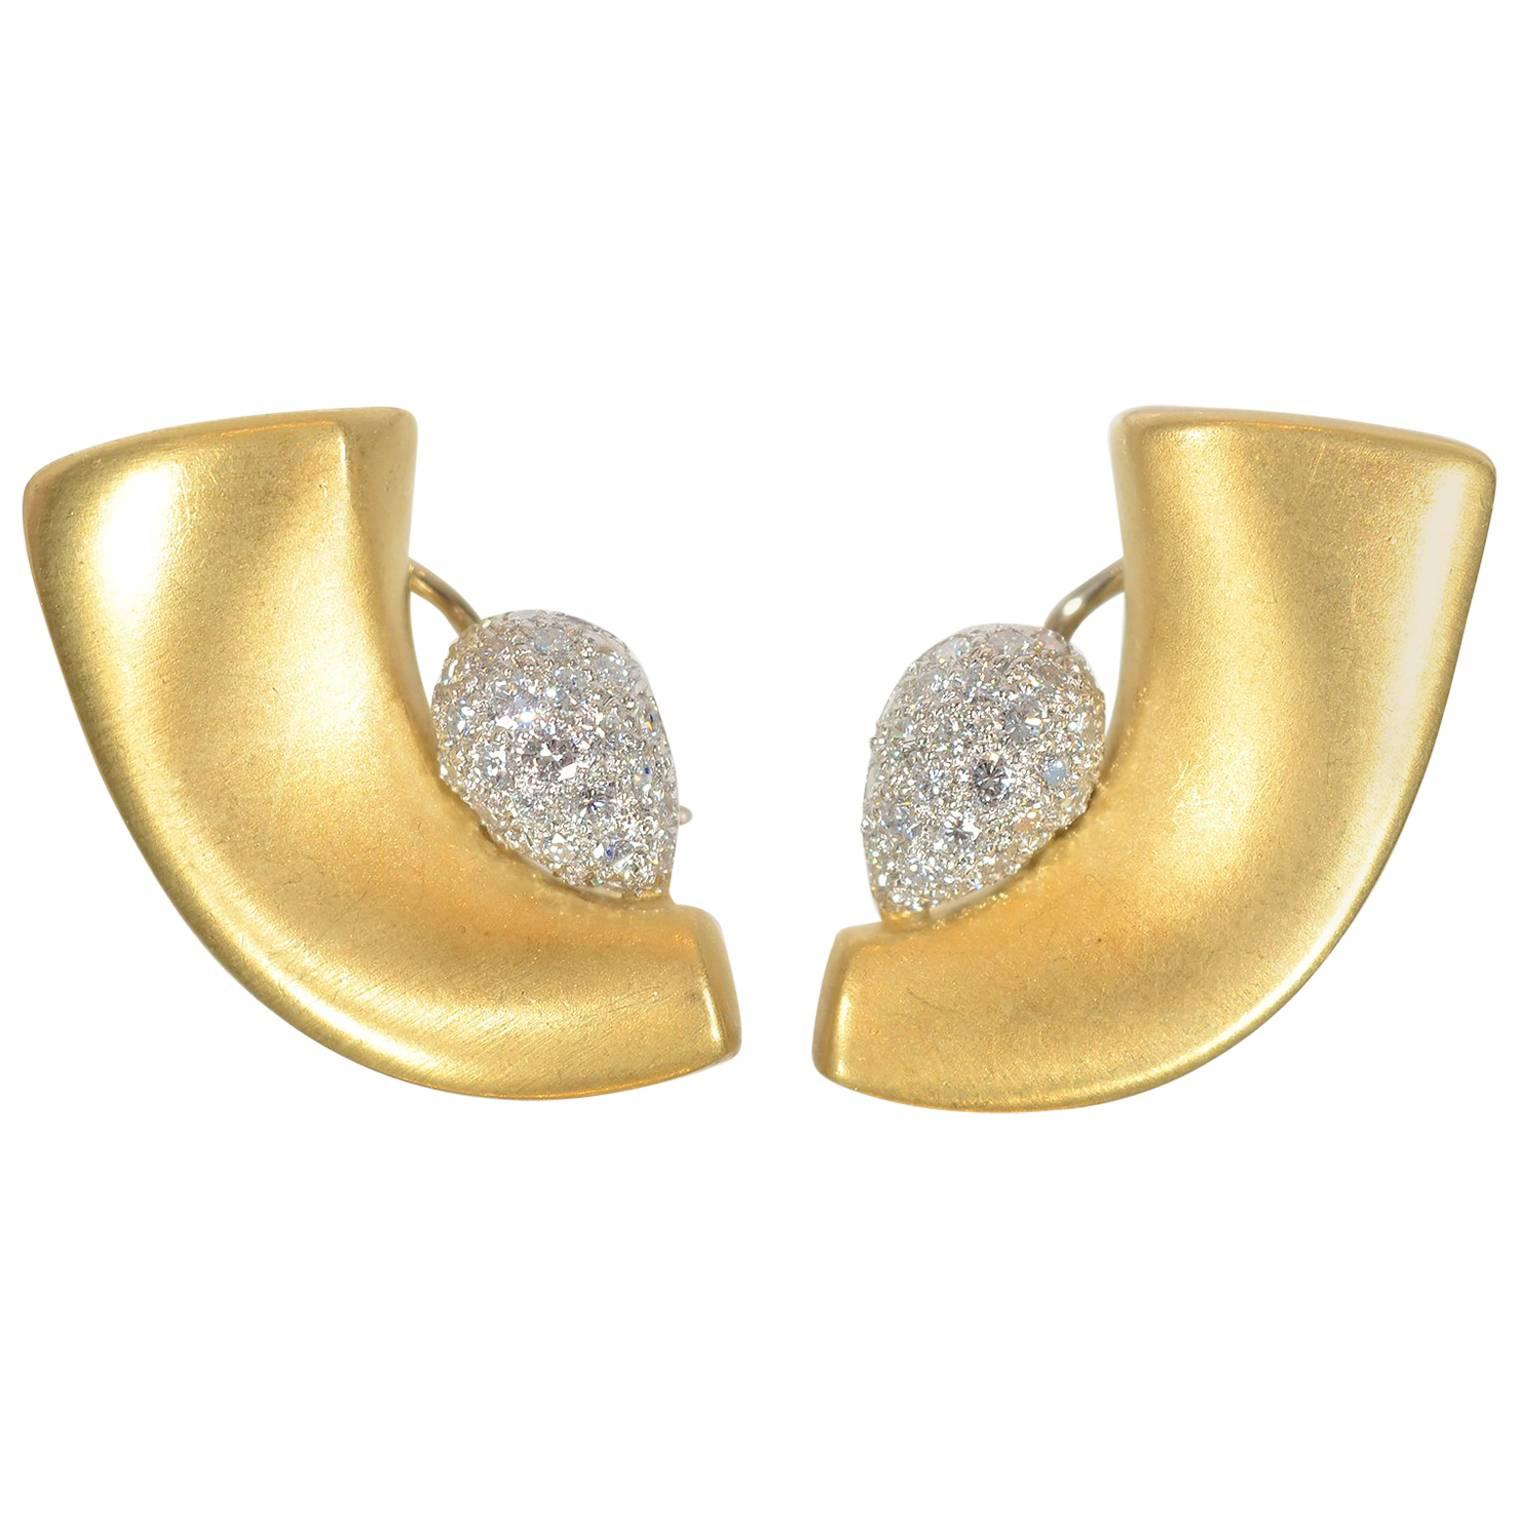 Marlene Stowe Crescent Earrings with Pave Diamonds